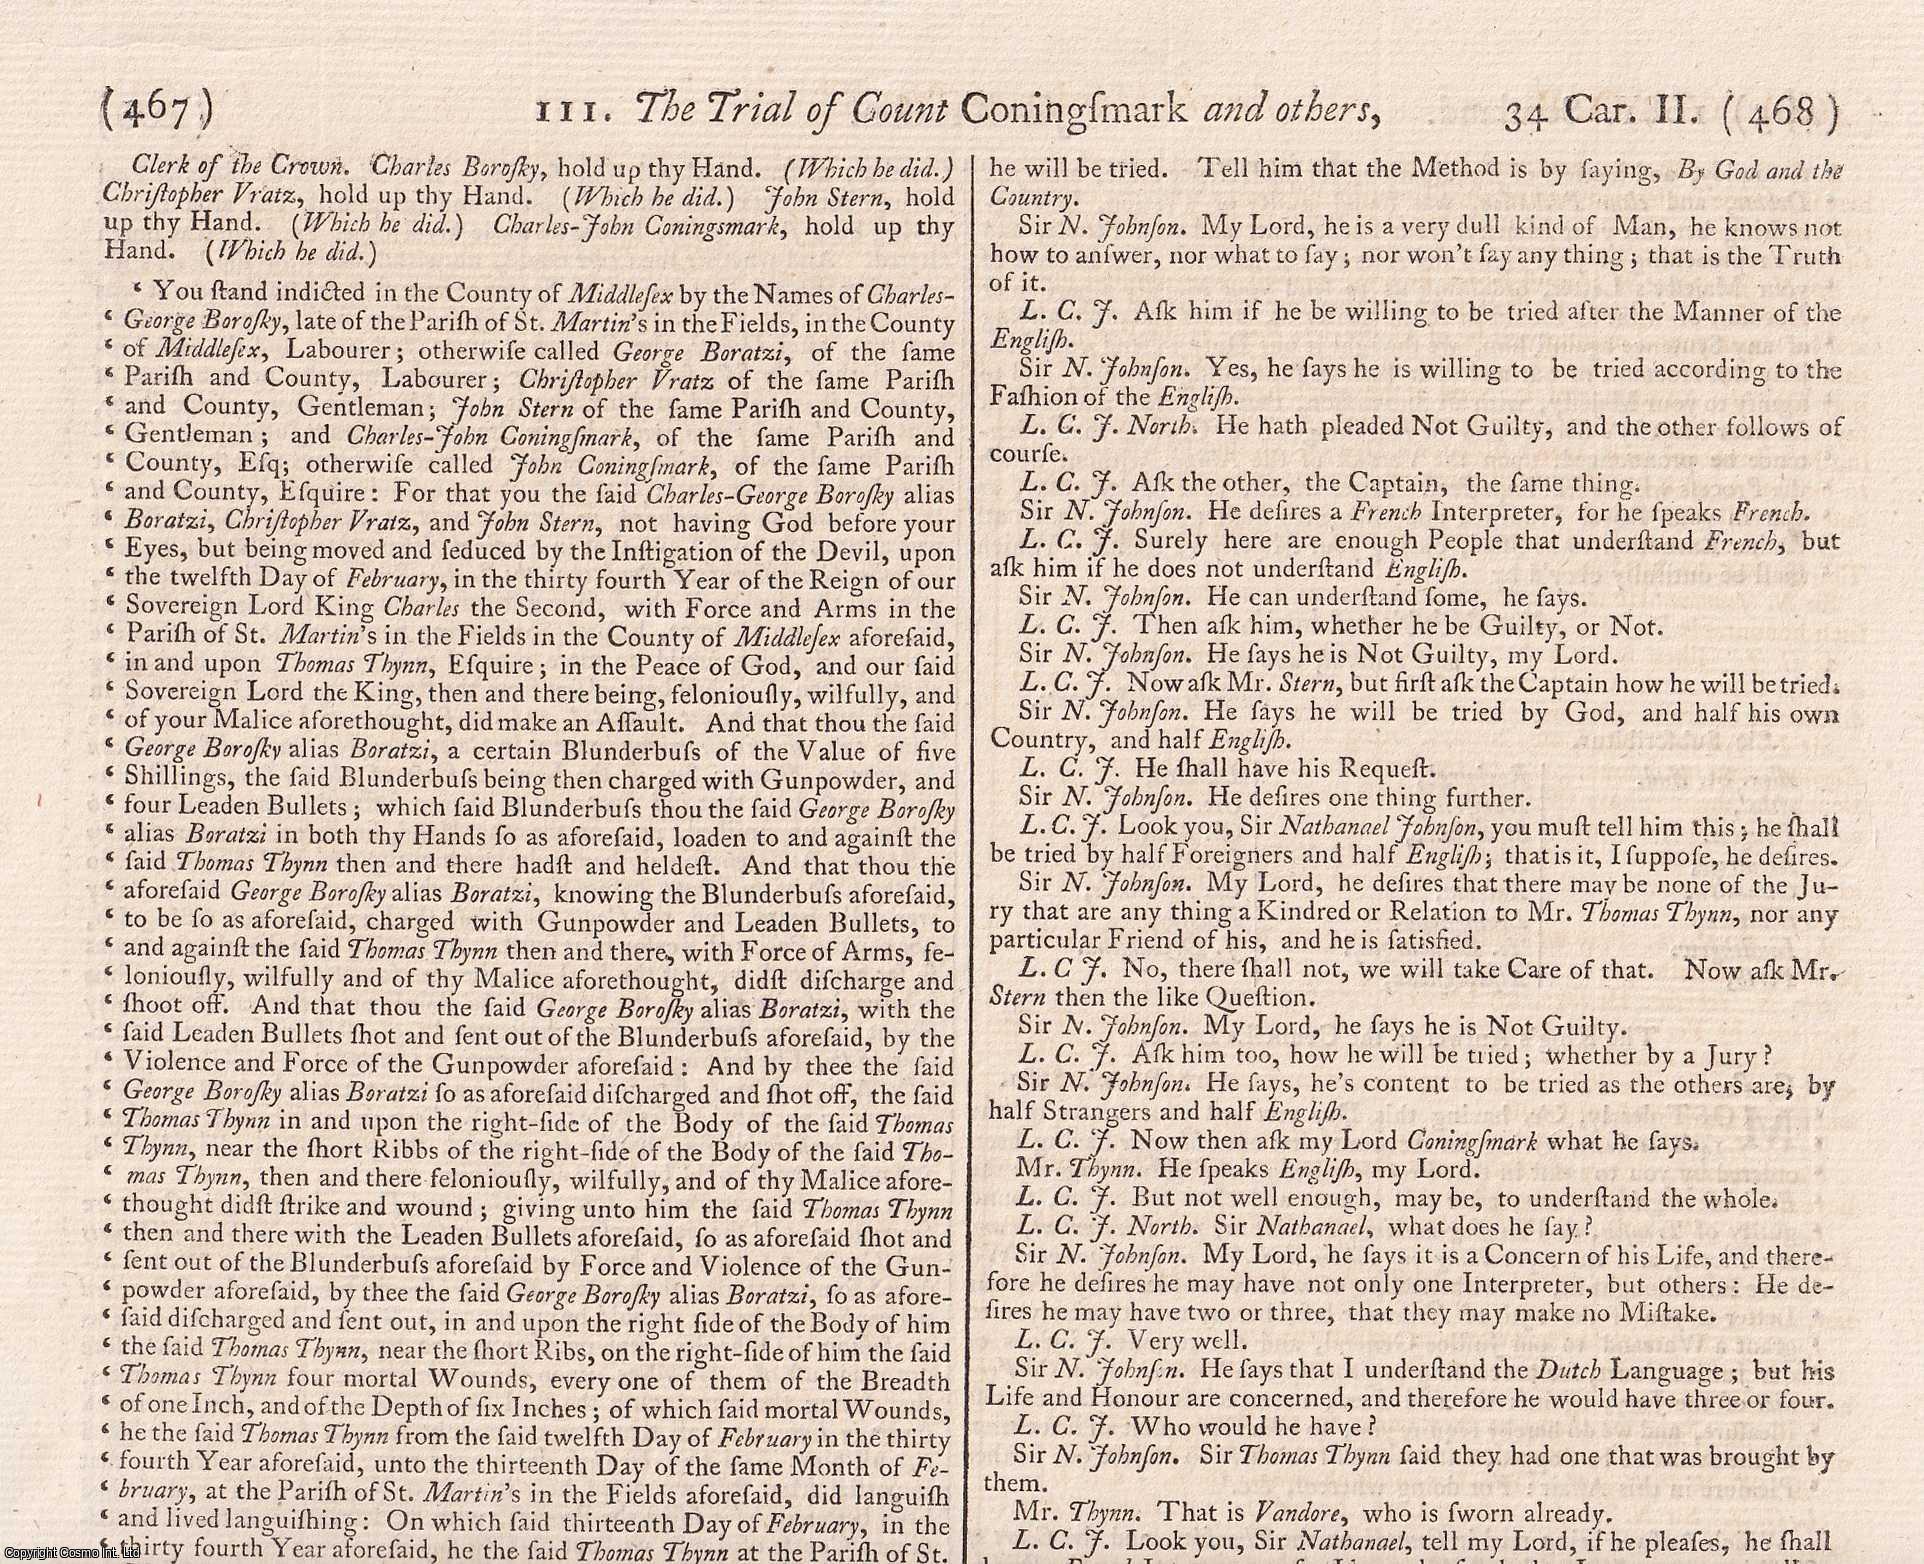 [Trial] - The Trial of George Borosky alias Boratzi, Christopher Uratz, and John Stern, and Charles-John Count Coningsmark, at the Old Bailey, for the Murder of Thomas Thynn, Esq, February 28, 1681. An original article from the Collected State Trials.